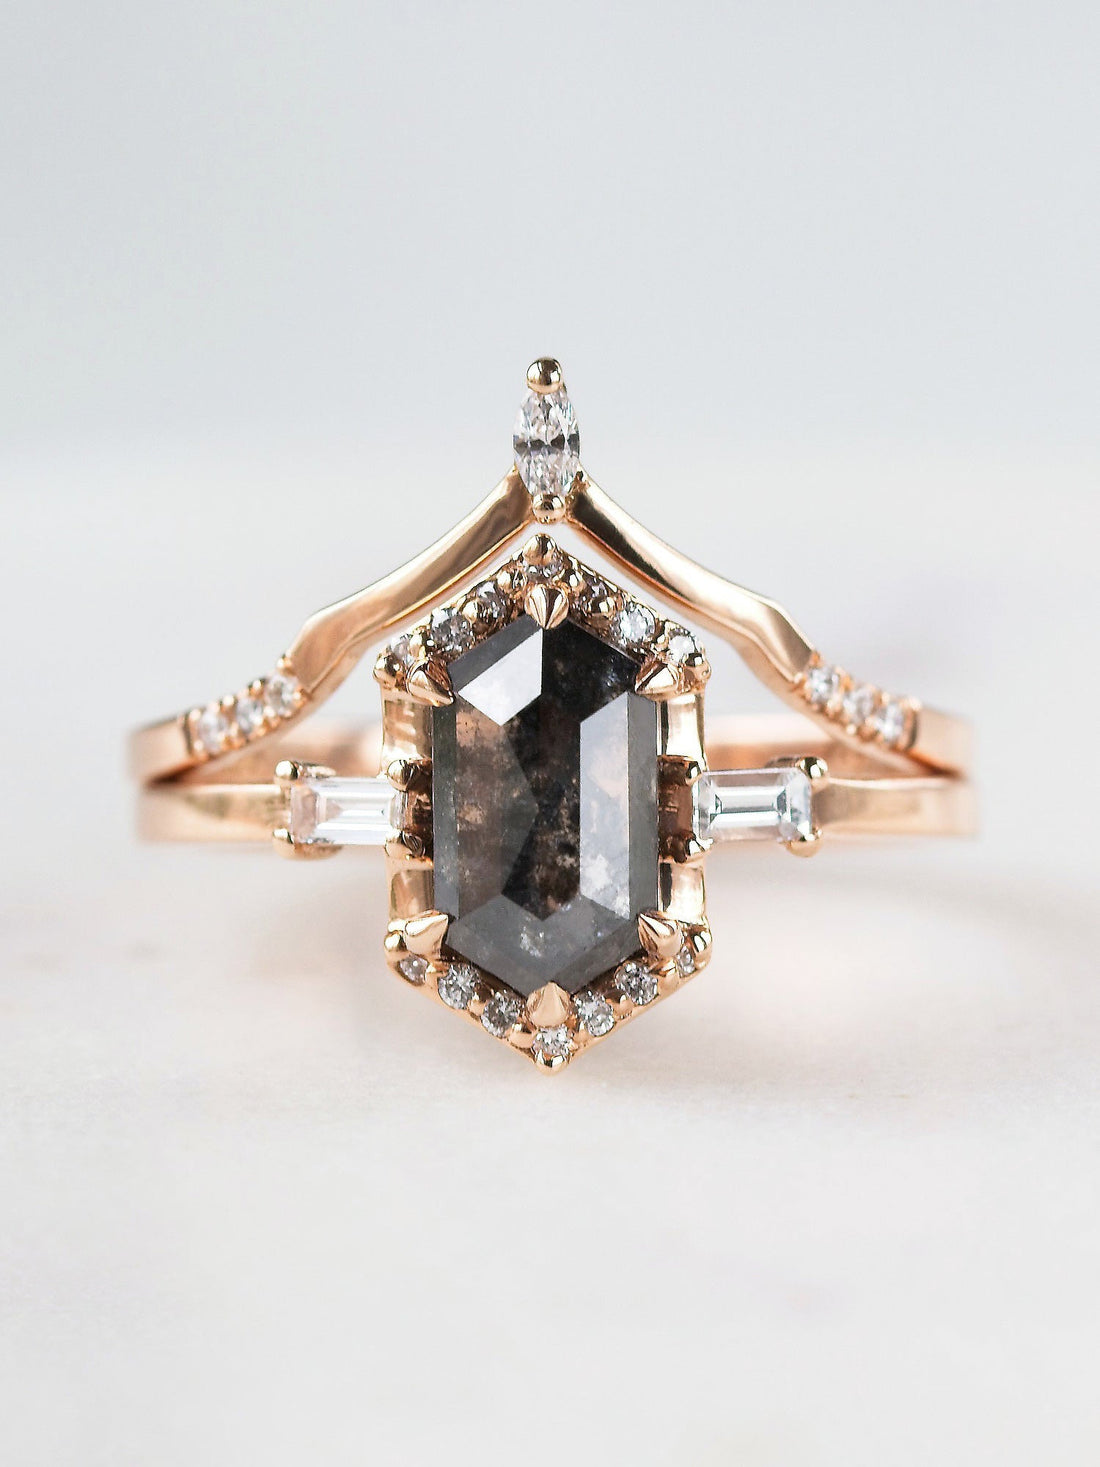 Unique art deco styled hexagon salt and pepper diamond engagement ring in 14k rose gold with baguette and round diamonds with matching band.